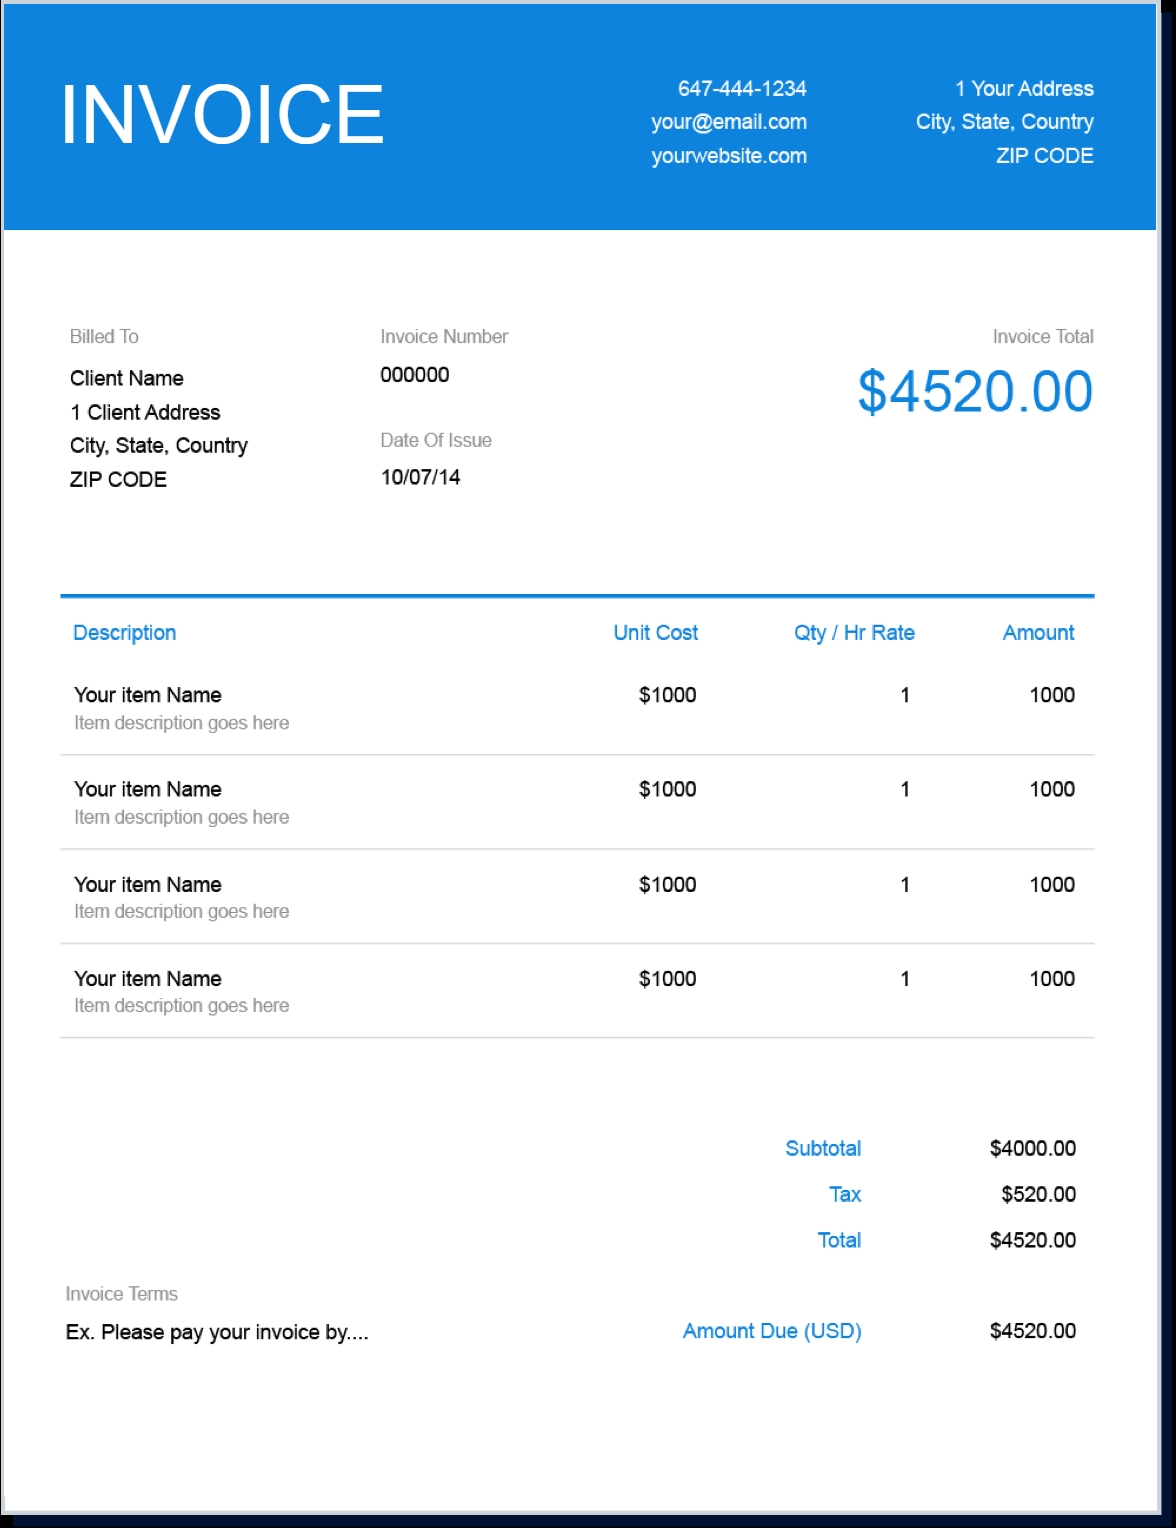 invoice template create and send free invoices instantly legal fee invoice sample